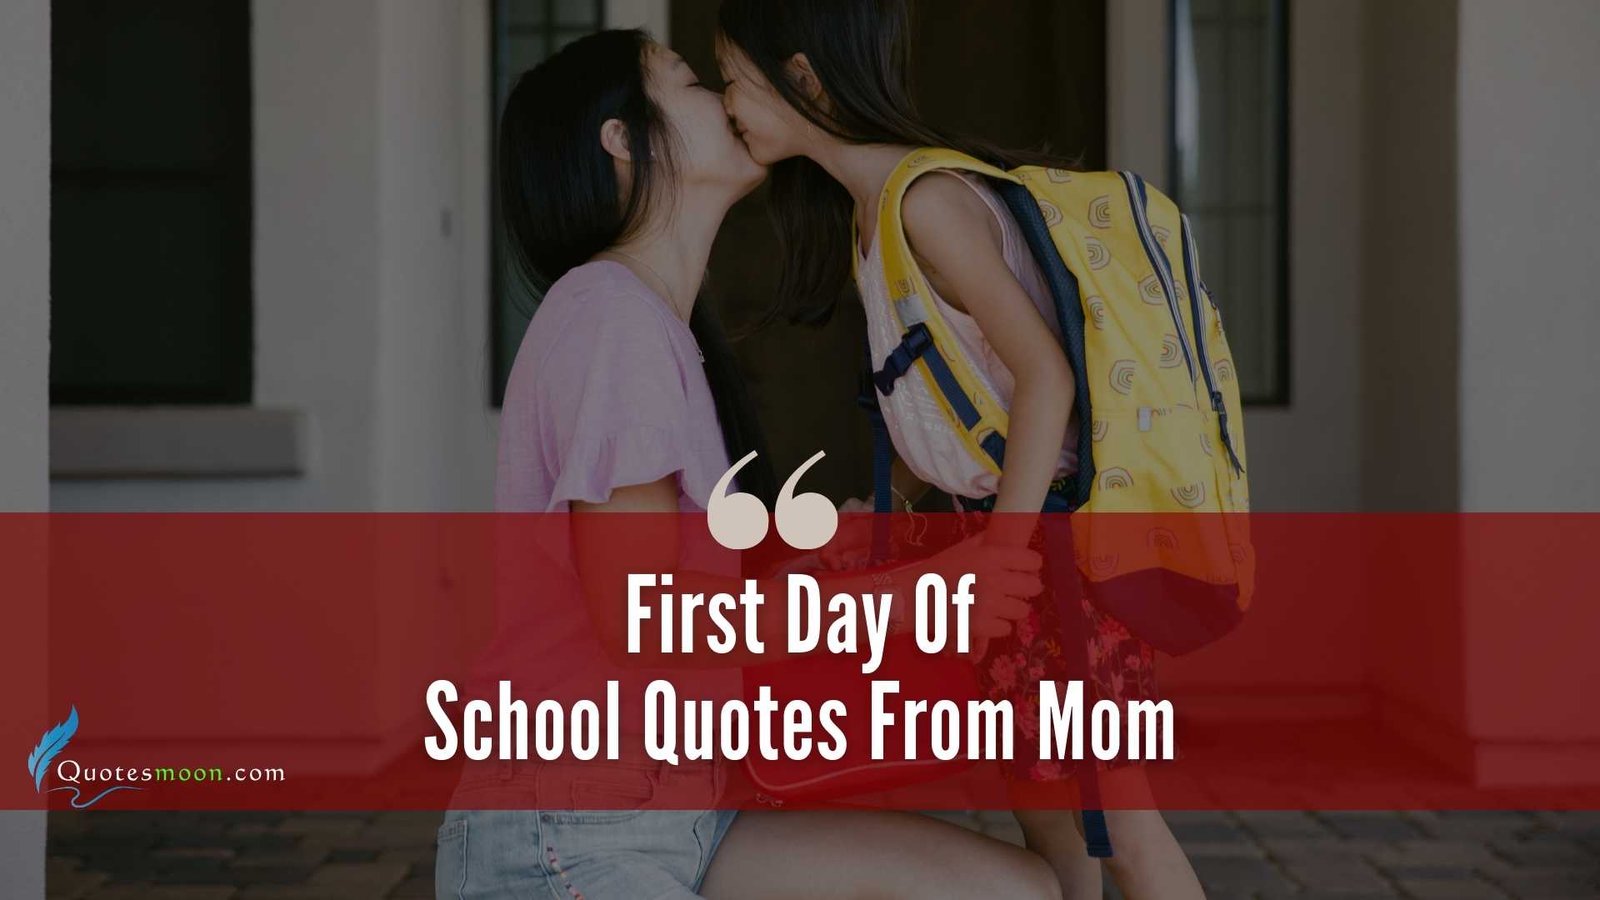 First Day Of School Quotes From Mom